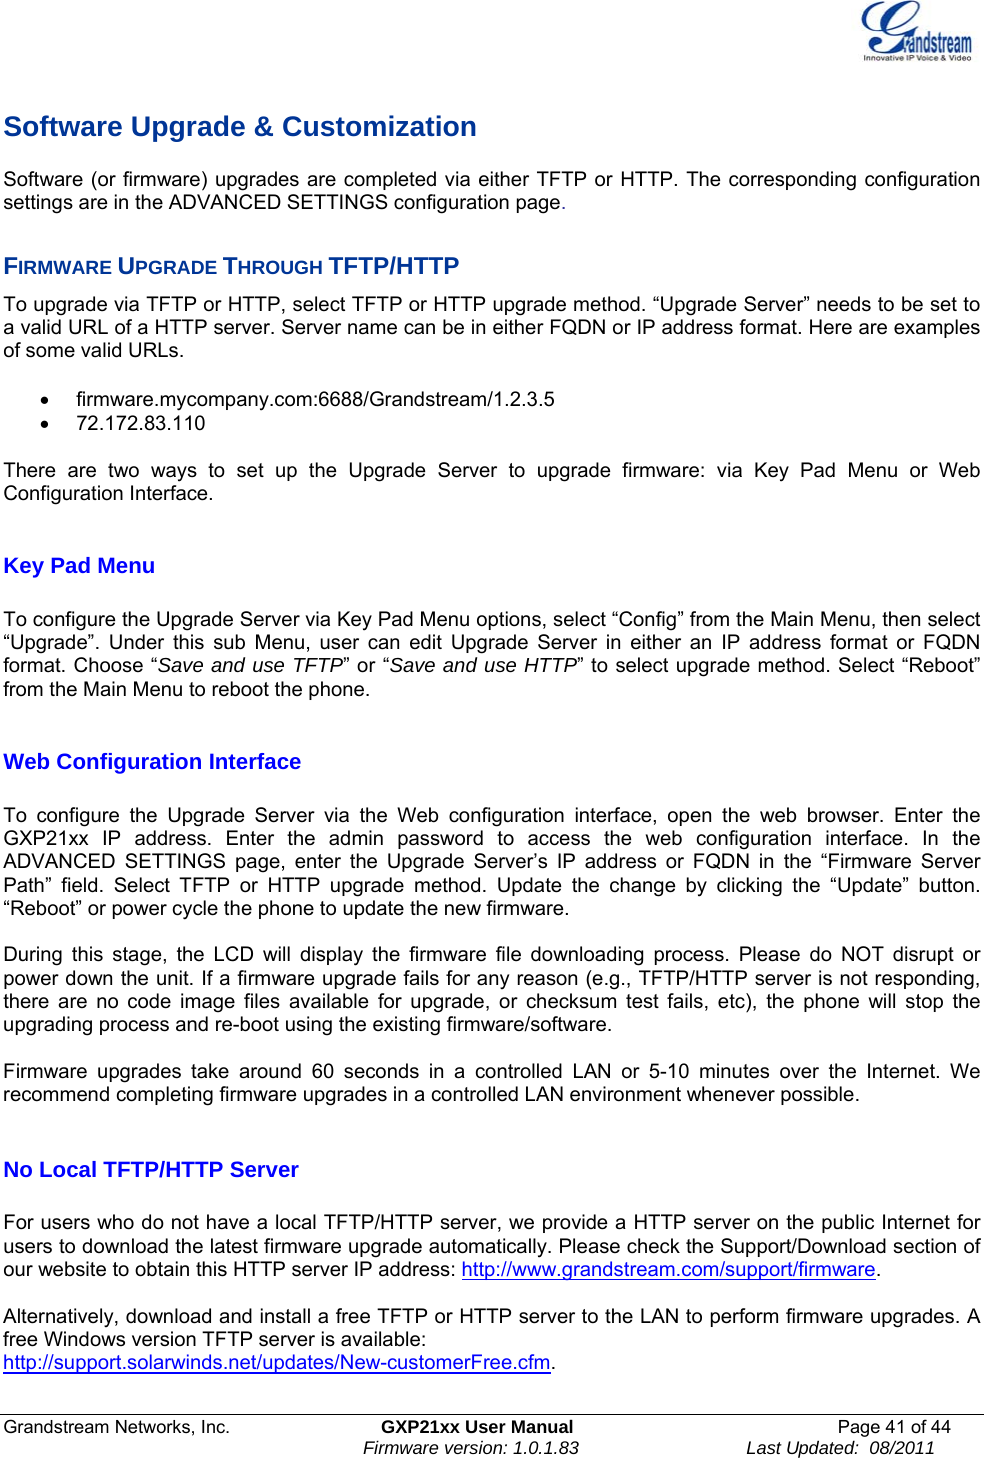  Grandstream Networks, Inc.  GXP21xx User Manual  Page 41 of 44                                                                Firmware version: 1.0.1.83                                 Last Updated:  08/2011  Software Upgrade &amp; Customization Software (or firmware) upgrades are completed via either TFTP or HTTP. The corresponding configuration settings are in the ADVANCED SETTINGS configuration page.   FIRMWARE UPGRADE THROUGH TFTP/HTTP To upgrade via TFTP or HTTP, select TFTP or HTTP upgrade method. “Upgrade Server” needs to be set to a valid URL of a HTTP server. Server name can be in either FQDN or IP address format. Here are examples of some valid URLs.   • firmware.mycompany.com:6688/Grandstream/1.2.3.5 • 72.172.83.110    There are two ways to set up the Upgrade Server to upgrade firmware: via Key Pad Menu or Web Configuration Interface.  Key Pad Menu        To configure the Upgrade Server via Key Pad Menu options, select “Config” from the Main Menu, then select “Upgrade”. Under this sub Menu, user can edit Upgrade Server in either an IP address format or FQDN format. Choose “Save and use TFTP” or “Save and use HTTP” to select upgrade method. Select “Reboot” from the Main Menu to reboot the phone.  Web Configuration Interface  To configure the Upgrade Server via the Web configuration interface, open the web browser. Enter the GXP21xx IP address. Enter the admin password to access the web configuration interface. In the ADVANCED SETTINGS page, enter the Upgrade Server’s IP address or FQDN in the “Firmware Server Path” field. Select TFTP or HTTP upgrade method. Update the change by clicking the “Update” button. “Reboot” or power cycle the phone to update the new firmware.  During this stage, the LCD will display the firmware file downloading process. Please do NOT disrupt or power down the unit. If a firmware upgrade fails for any reason (e.g., TFTP/HTTP server is not responding, there are no code image files available for upgrade, or checksum test fails, etc), the phone will stop the upgrading process and re-boot using the existing firmware/software.  Firmware upgrades take around 60 seconds in a controlled LAN or 5-10 minutes over the Internet. We recommend completing firmware upgrades in a controlled LAN environment whenever possible.   No Local TFTP/HTTP Server  For users who do not have a local TFTP/HTTP server, we provide a HTTP server on the public Internet for users to download the latest firmware upgrade automatically. Please check the Support/Download section of our website to obtain this HTTP server IP address: http://www.grandstream.com/support/firmware.  Alternatively, download and install a free TFTP or HTTP server to the LAN to perform firmware upgrades. A free Windows version TFTP server is available:   http://support.solarwinds.net/updates/New-customerFree.cfm.  